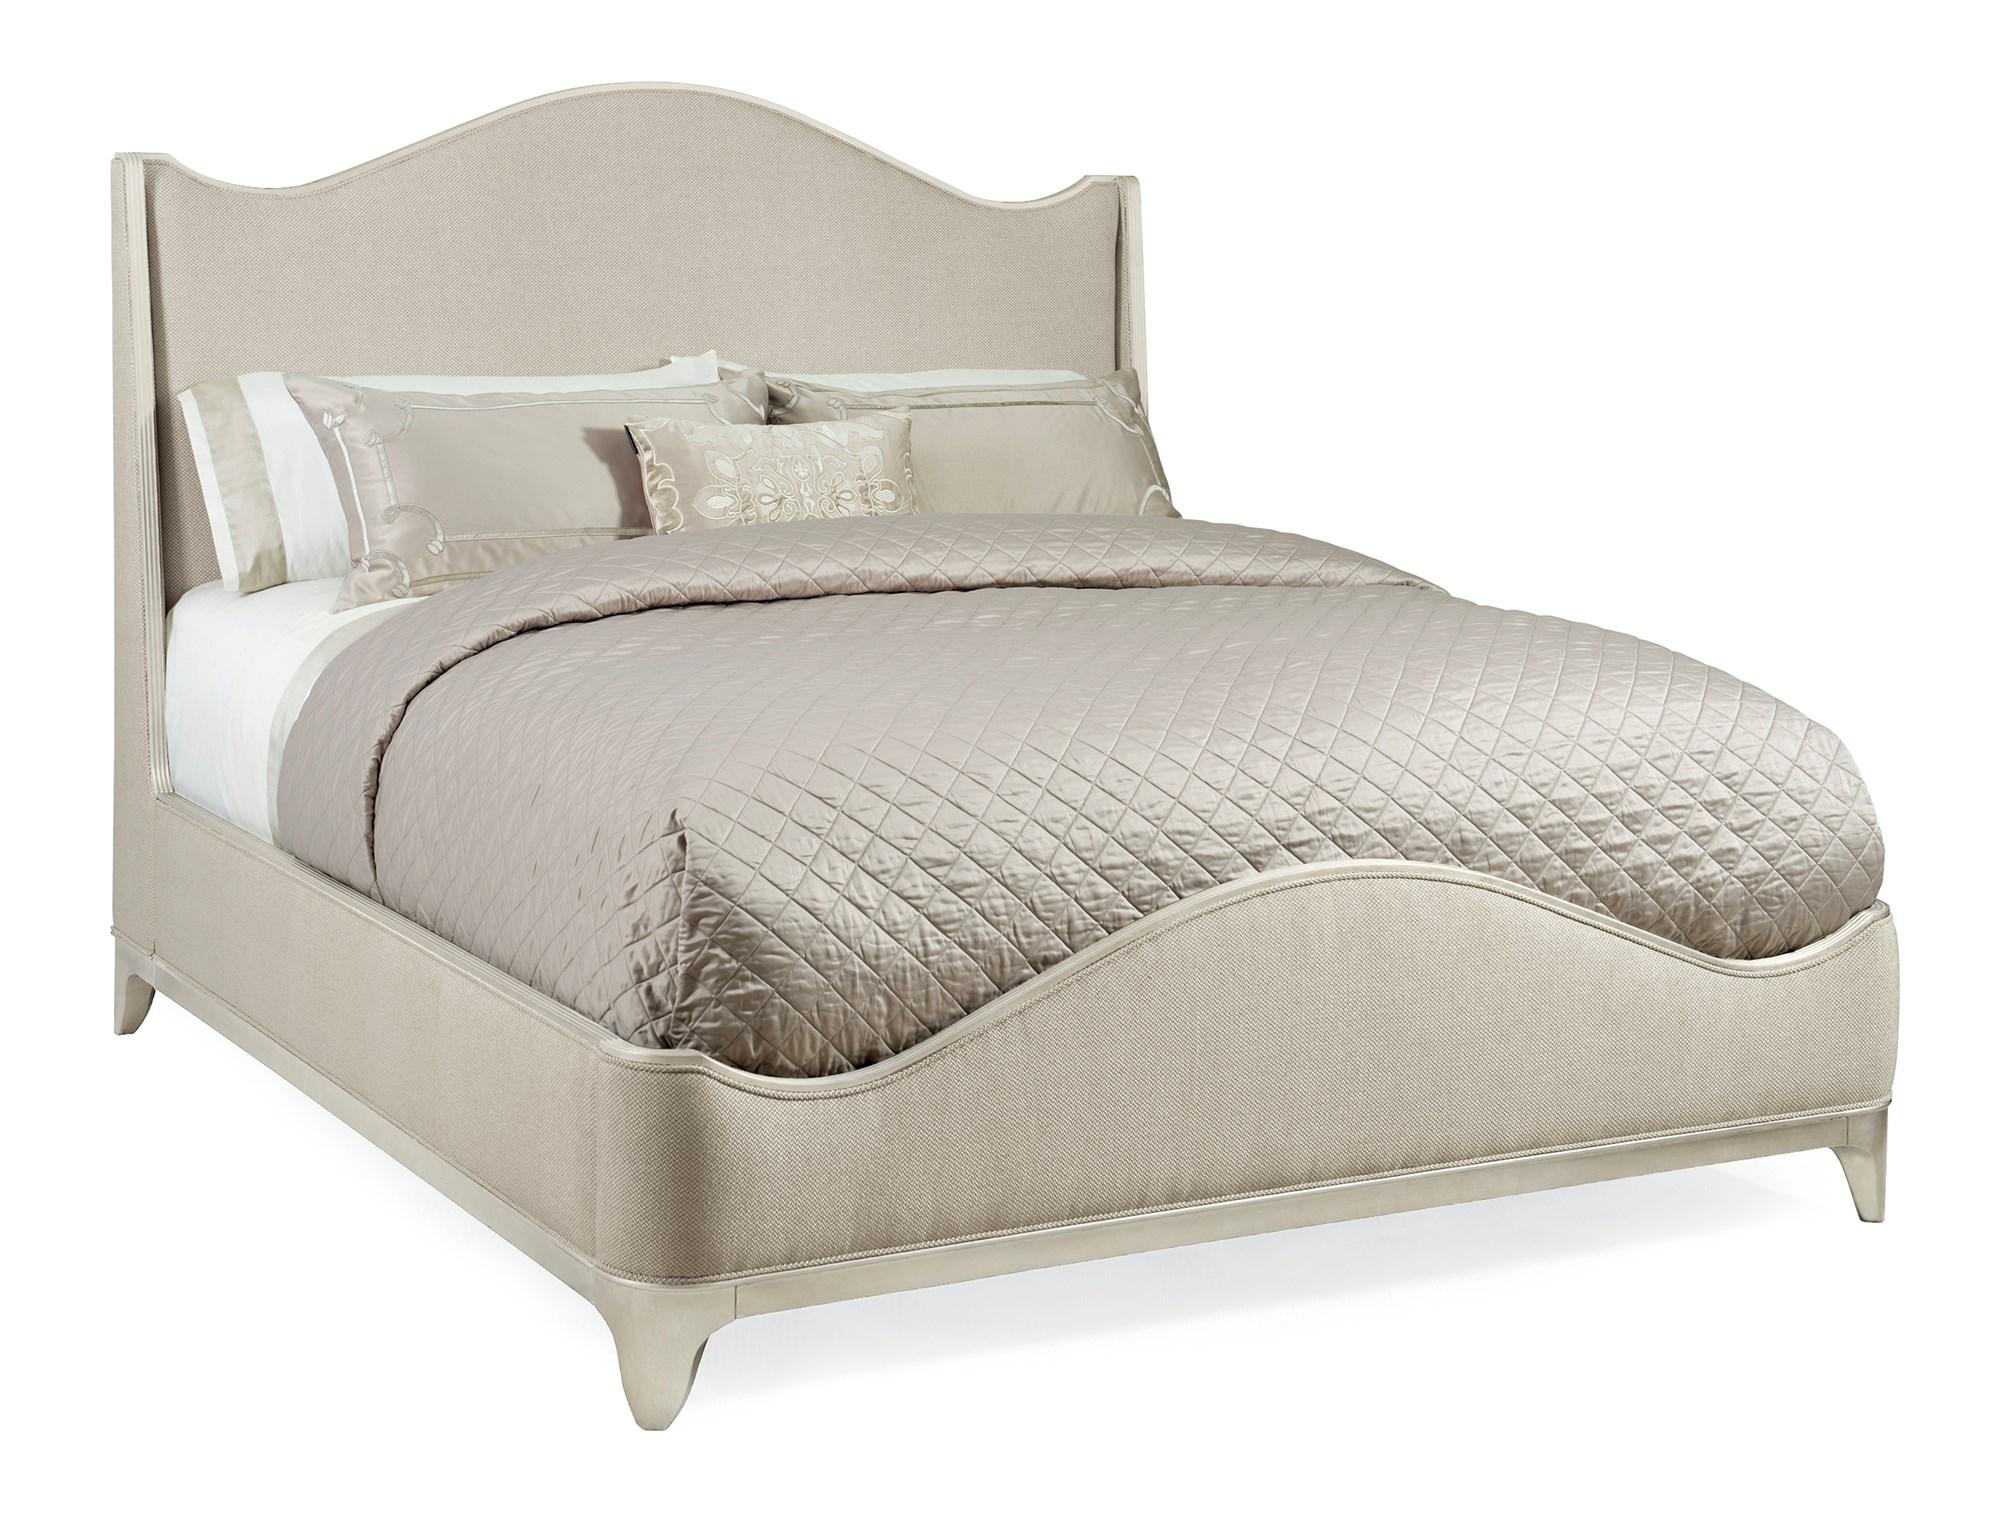 Contemporary Sleigh Bed AVONDALE QUEEN UPHOLSTERED BED C023-417-101 in Cream, Silver Fabric